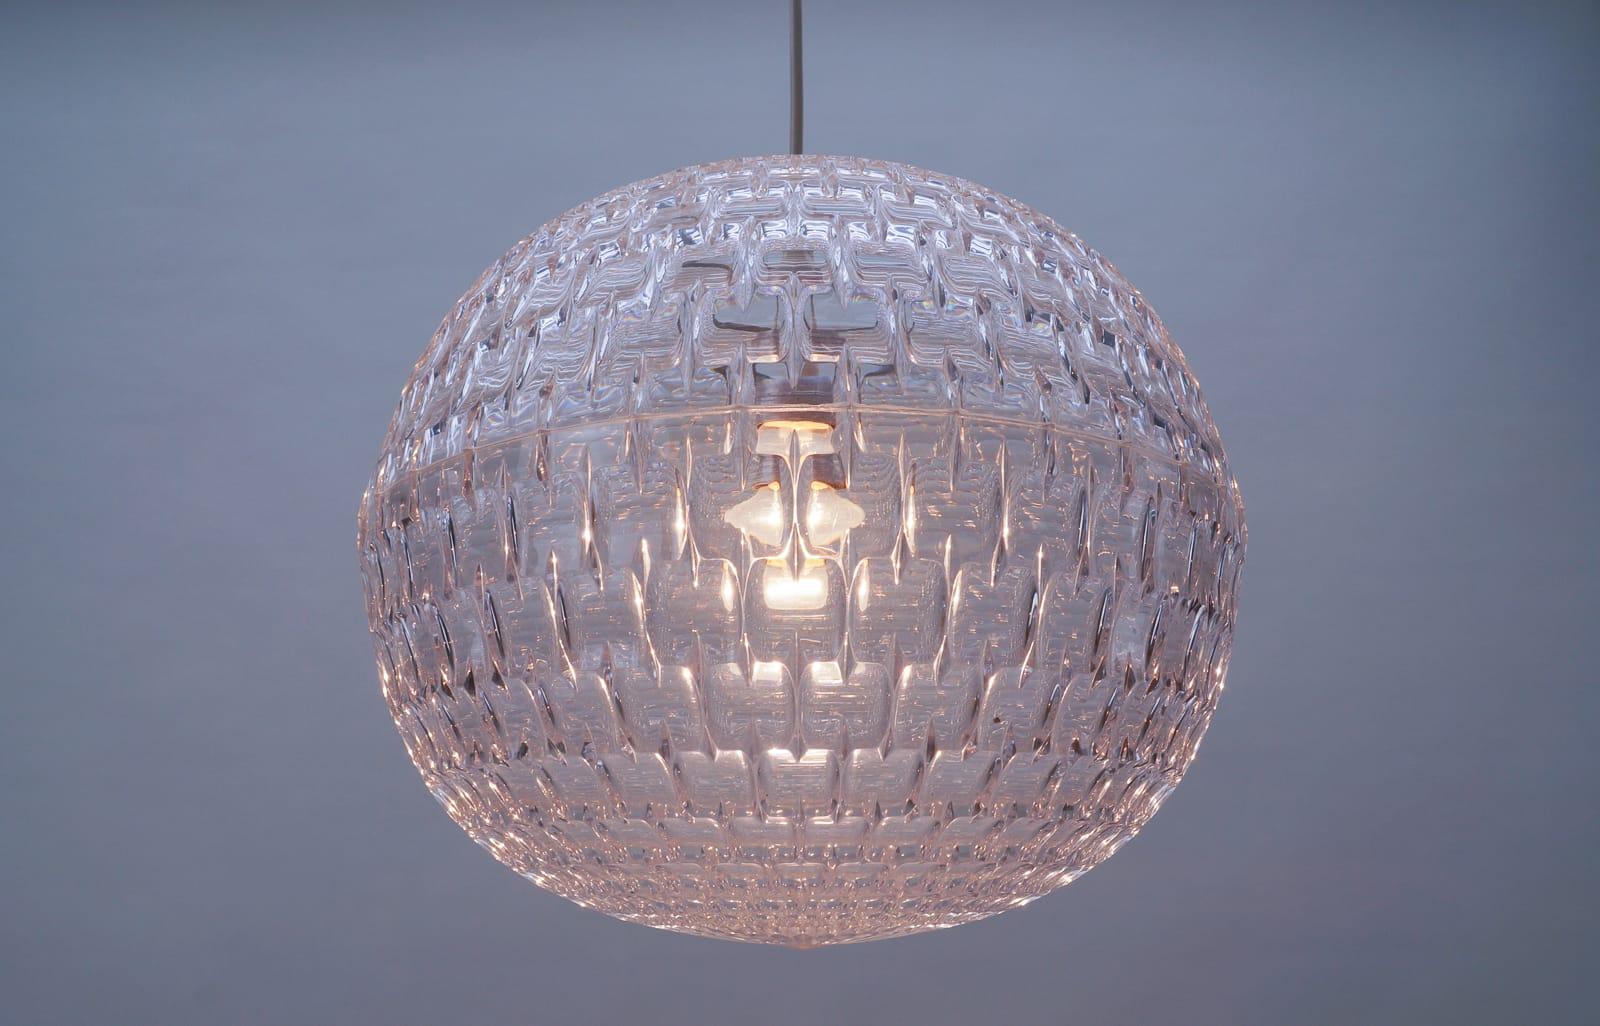 Clear Acrylic Pendant Lamp by Aloys F. Gangkofner for Erco Leuchten, 1960s For Sale 3